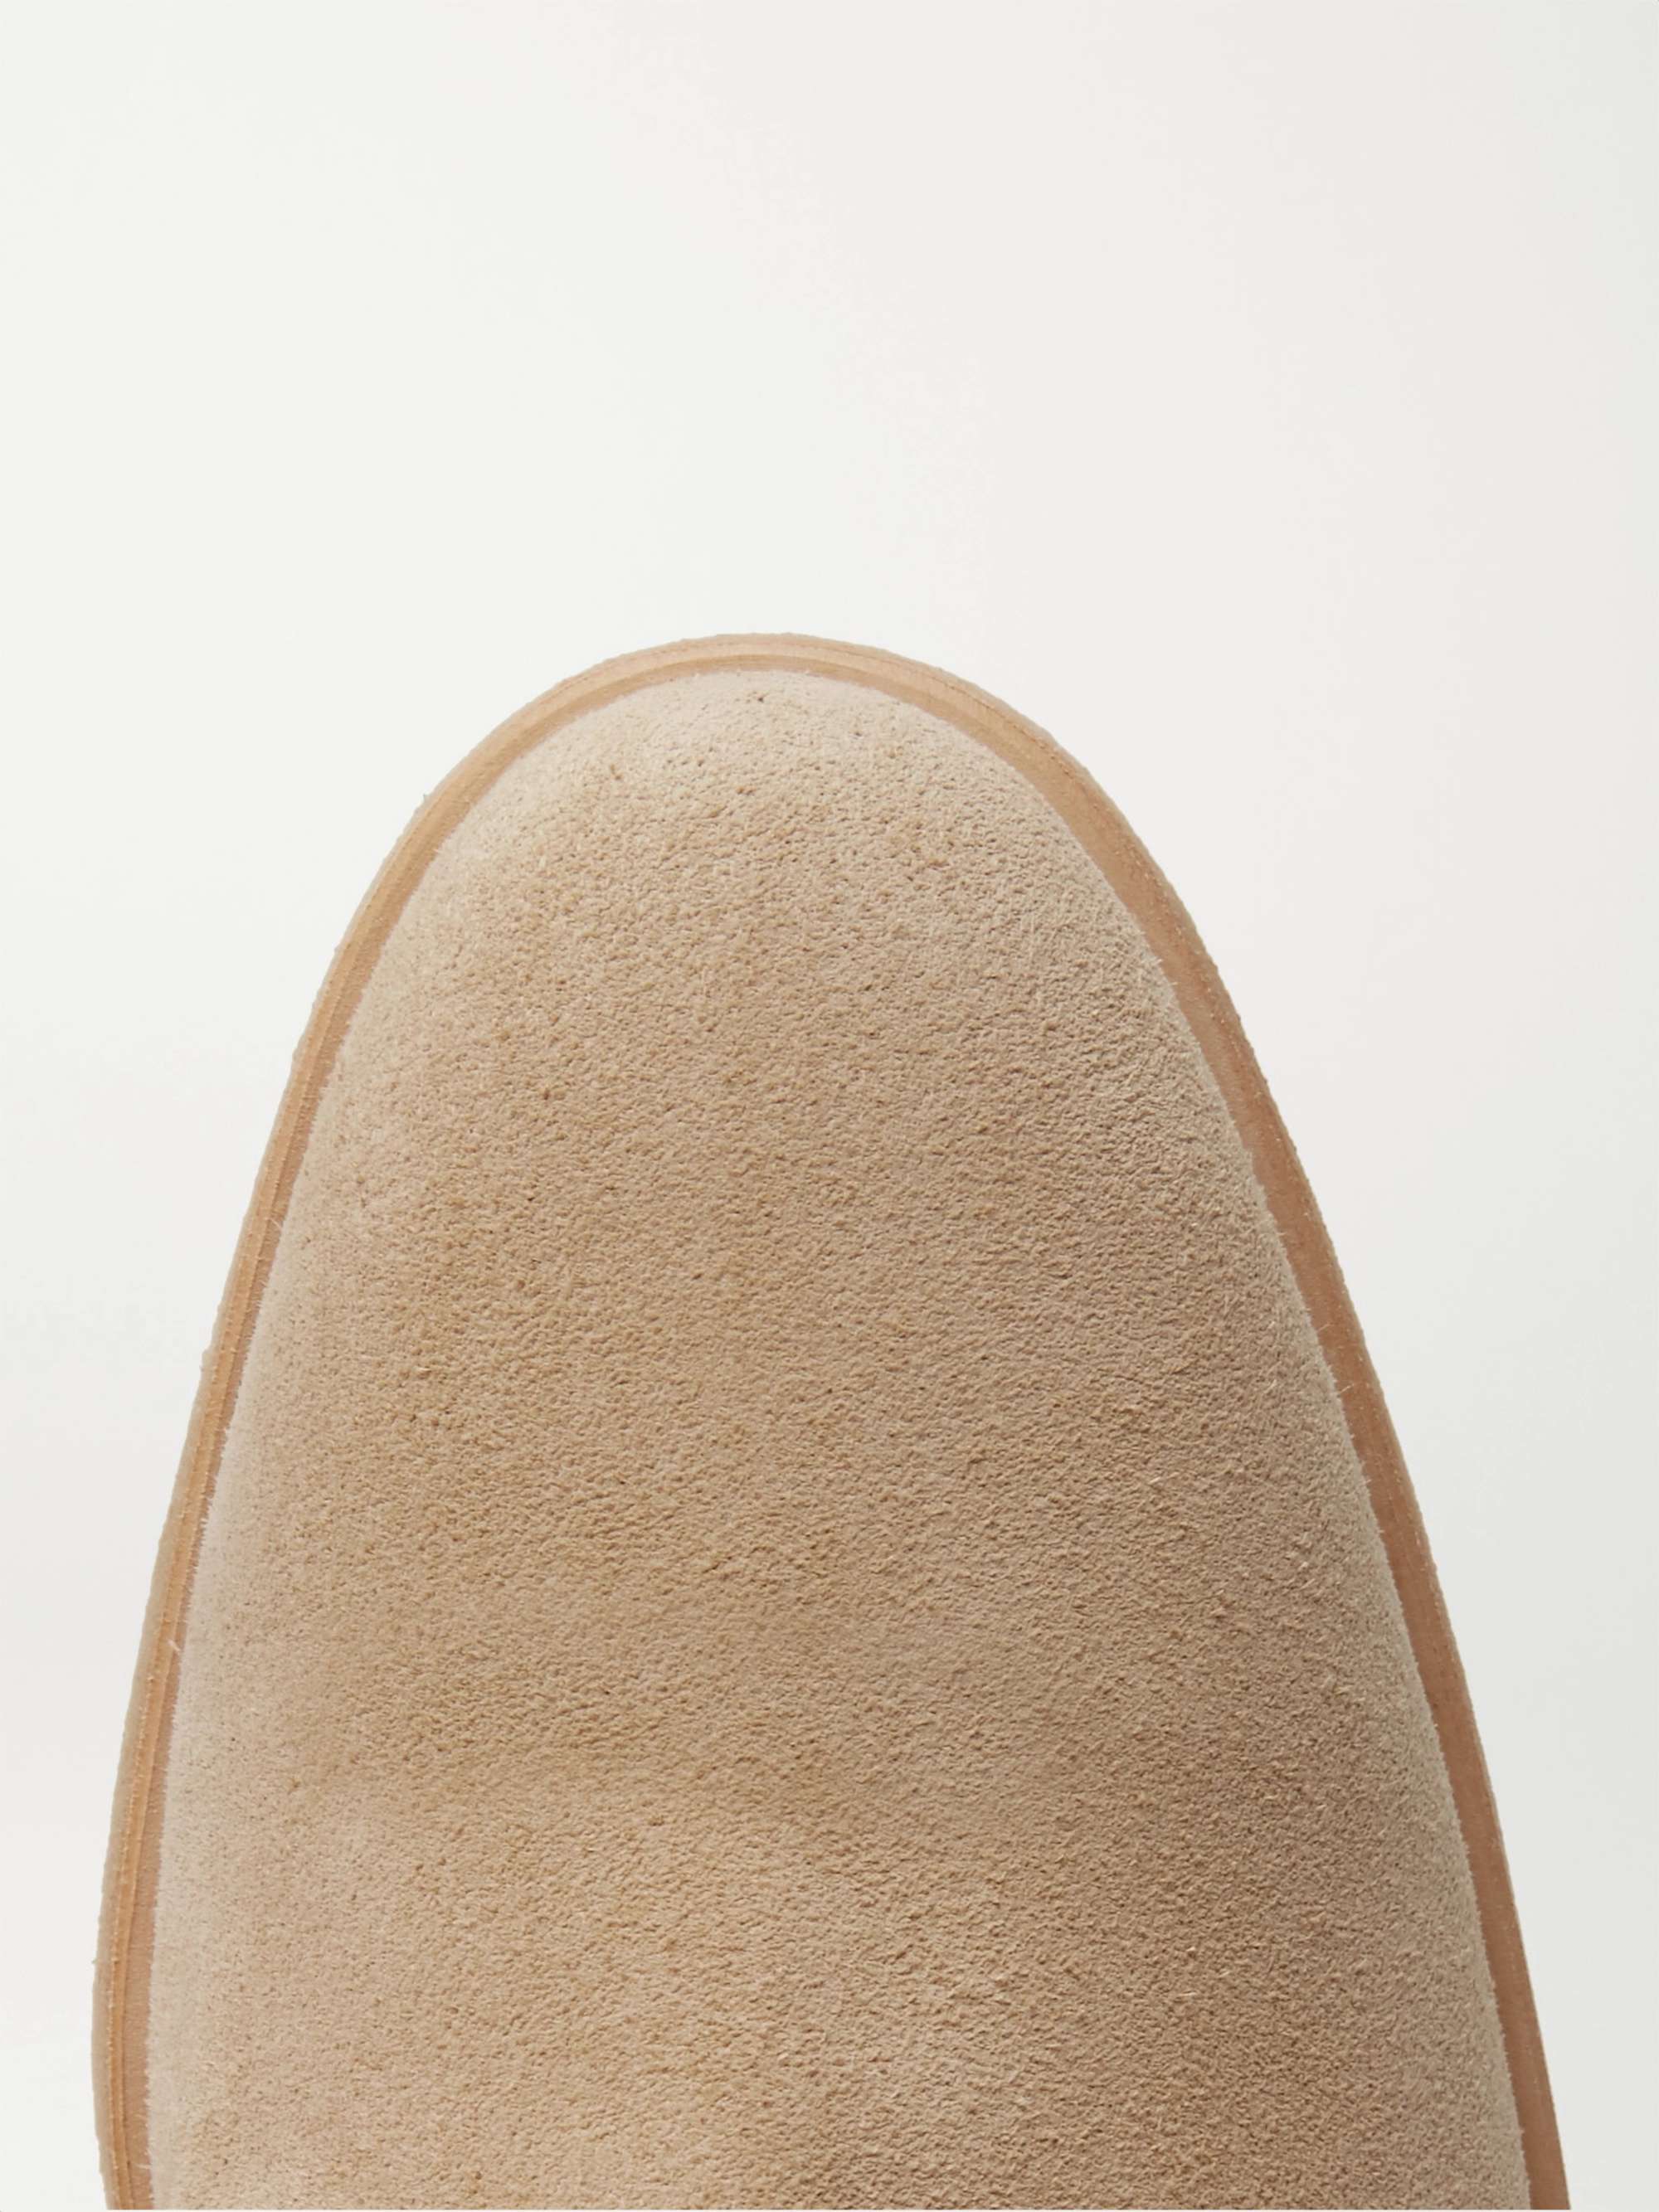 COMMON PROJECTS Suede Chelsea Boots for Men | MR PORTER